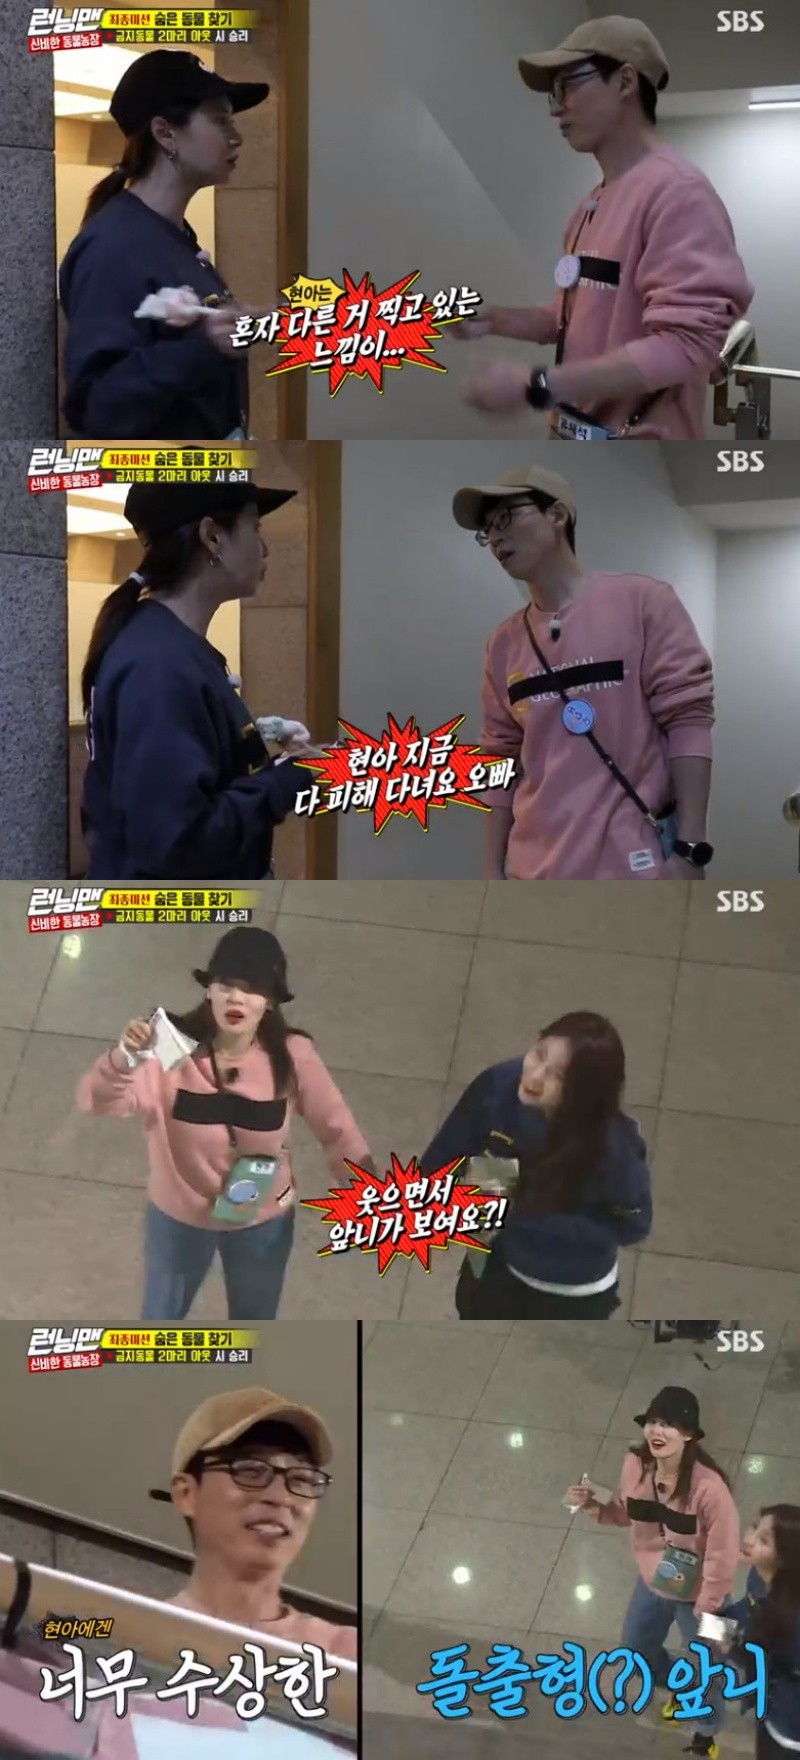 Thanks to the over-immersion Hyuna in the shooting concept, the members of Running Man were embarrassed but could not hide their laughter.On the 17th broadcast Running Man, Hyonah played the game with Yoo Jae-Suk and Poco Rosso team, but he also avoided the same team, Yoo Jae-Suk.In addition, he showed his deep immersion to his VJ, saying, You have to breathe little.Yoo Jae-Suk complained to the people he met, Why does Hyo avoid me? So Song Ji-hyo said, I am avoiding everything now.We talked among ourselves, but it seems to be taking another one alone. After the reunion, Yoo Jae-Suk and Hyona. Hyona asked Yoo Jae-Suk, Why are you avoiding me? And asked, Why do you see the front teeth?I made another sea of laughter, he said.On the day, Running Man was divided into bear teams (Sechan - Jihyo), snake teams (Jongguk - Sihyeon), Poco Rosso team (Jaseok - Hyona), fox team (Hanna - Jiseok), rabbit team (Sommin - Haha), and tiger team (Gwangsu - Nationalju).